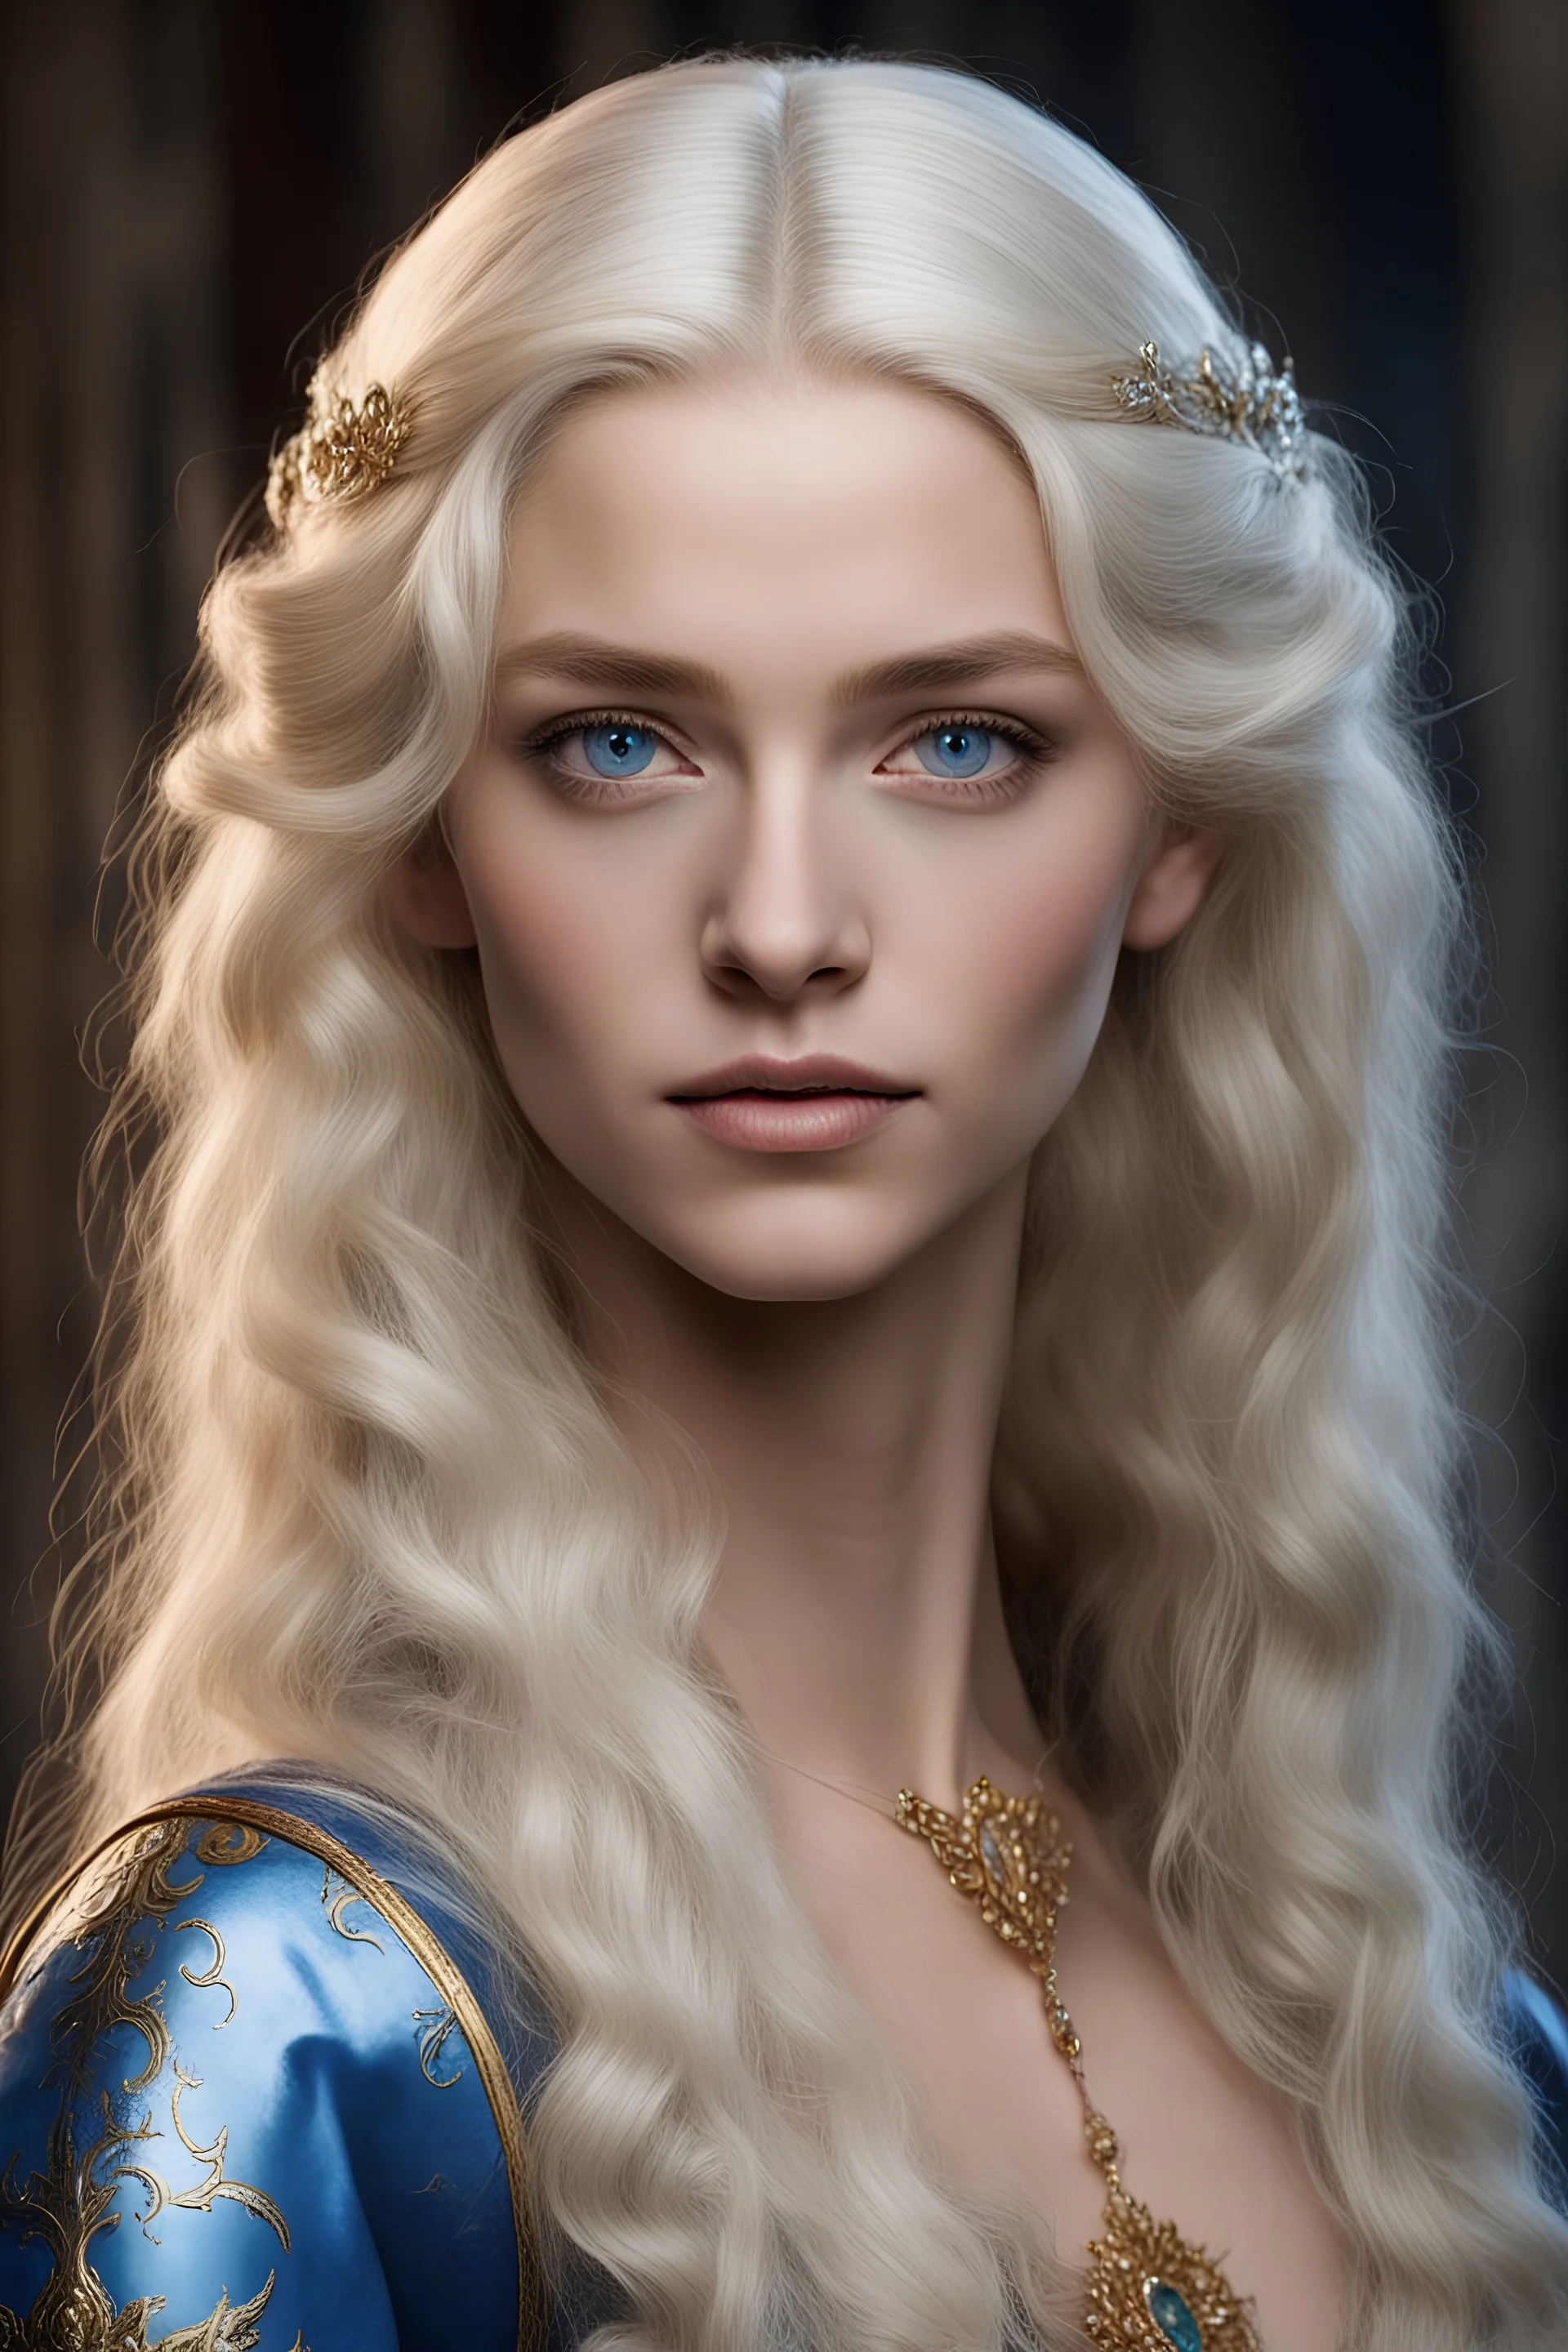 Maegelle Targaryen, aged 16, epitomizes Targaryen allure with her golden locks and sapphire eyes. Despite her royal lineage, her demeanor exudes youthful innocence and curiosity. She boasts a slender frame adorned with delicate features, framed by cascading golden hair. Her sapphire-blue eyes reflect wisdom beyond her years, contrasting with her porcelain skin and high cheekbones. Clad in Tudor-inspired attire, including a French hood and pale blues and teals, she embodies timeless elegance amid